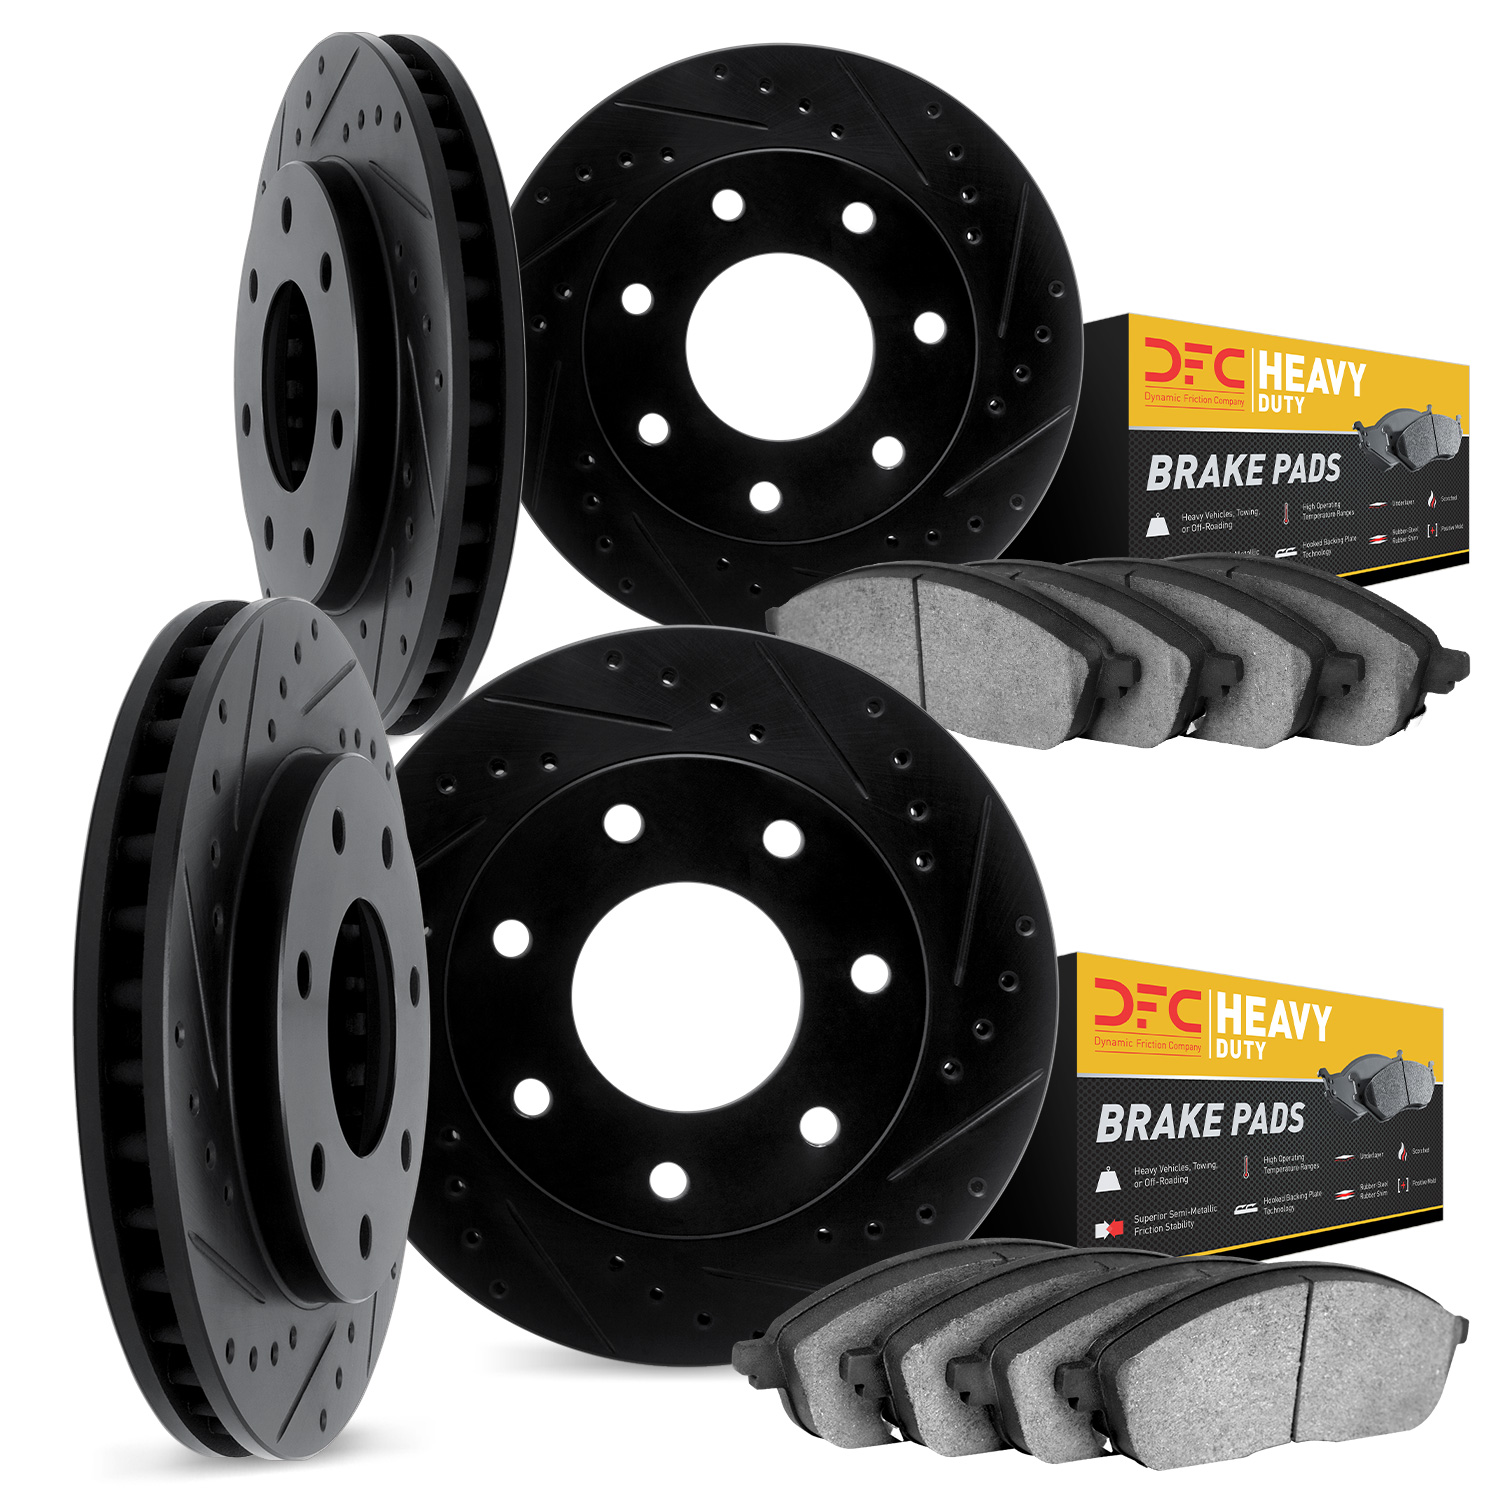 8204-99080 Drilled/Slotted Rotors w/Heavy-Duty Brake Pads Kit [Silver], 2004-2008 Ford/Lincoln/Mercury/Mazda, Position: Front an